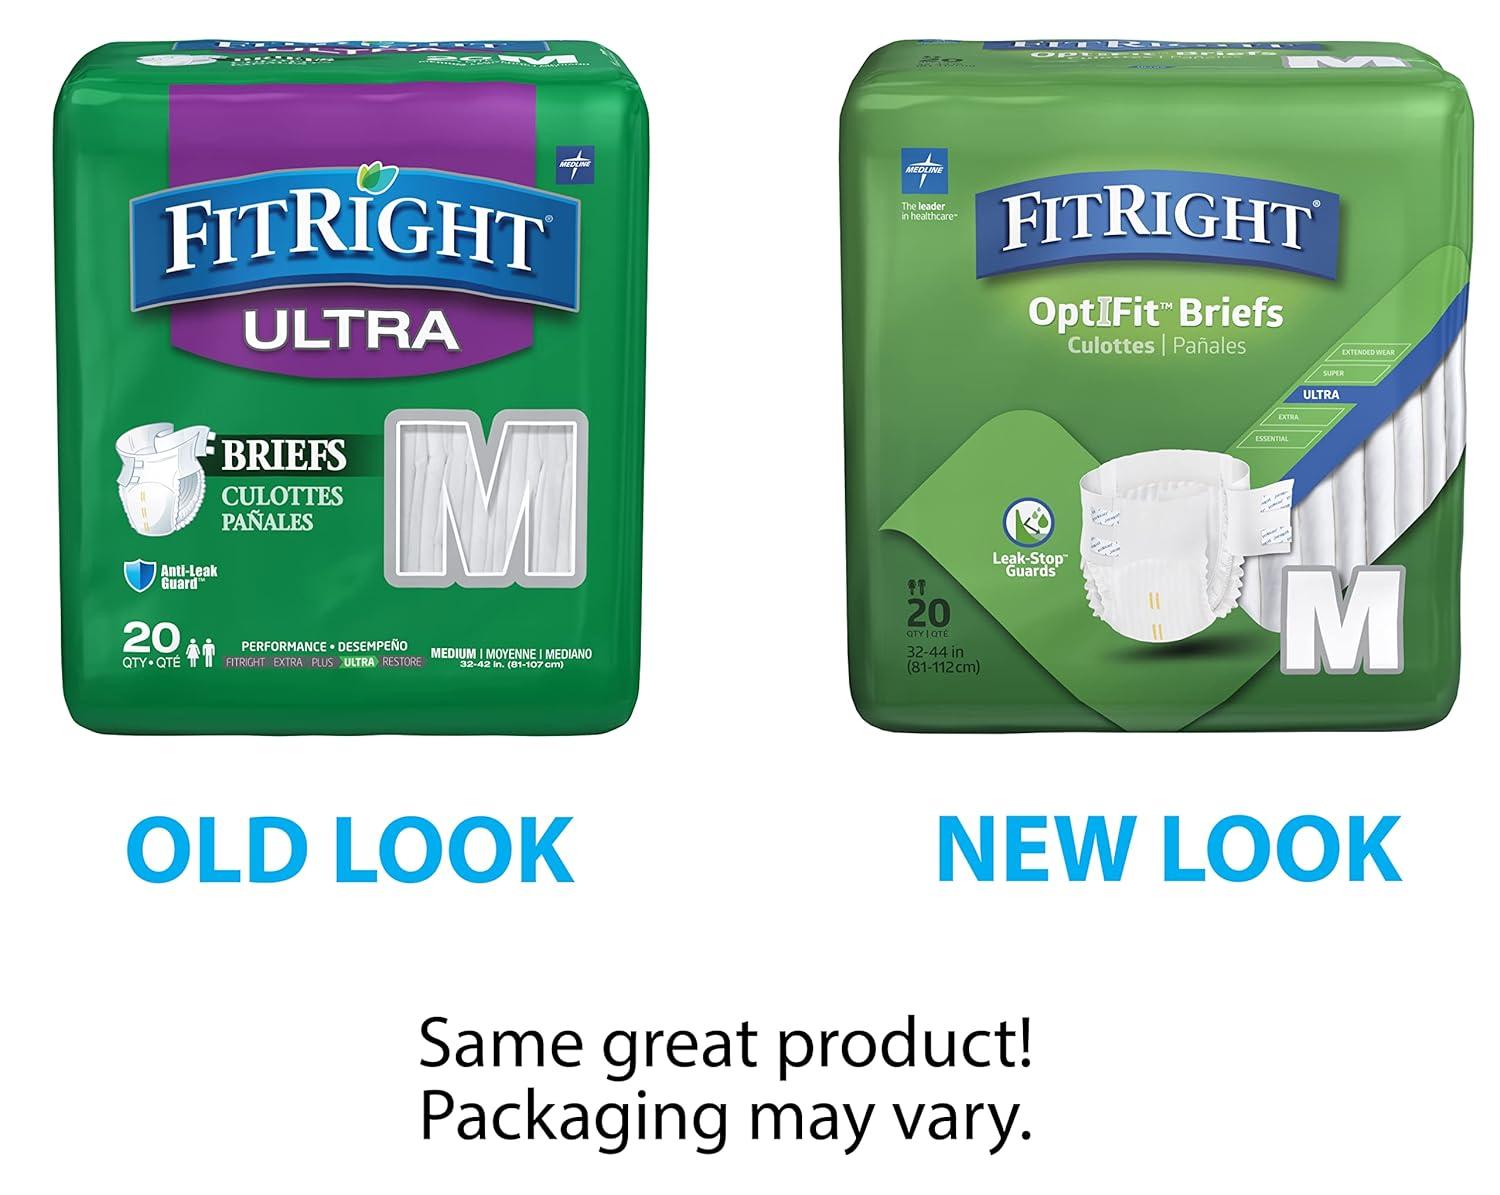 How to put on Medline FitRight Ultra Adult Incontinence Protection Briefs?  